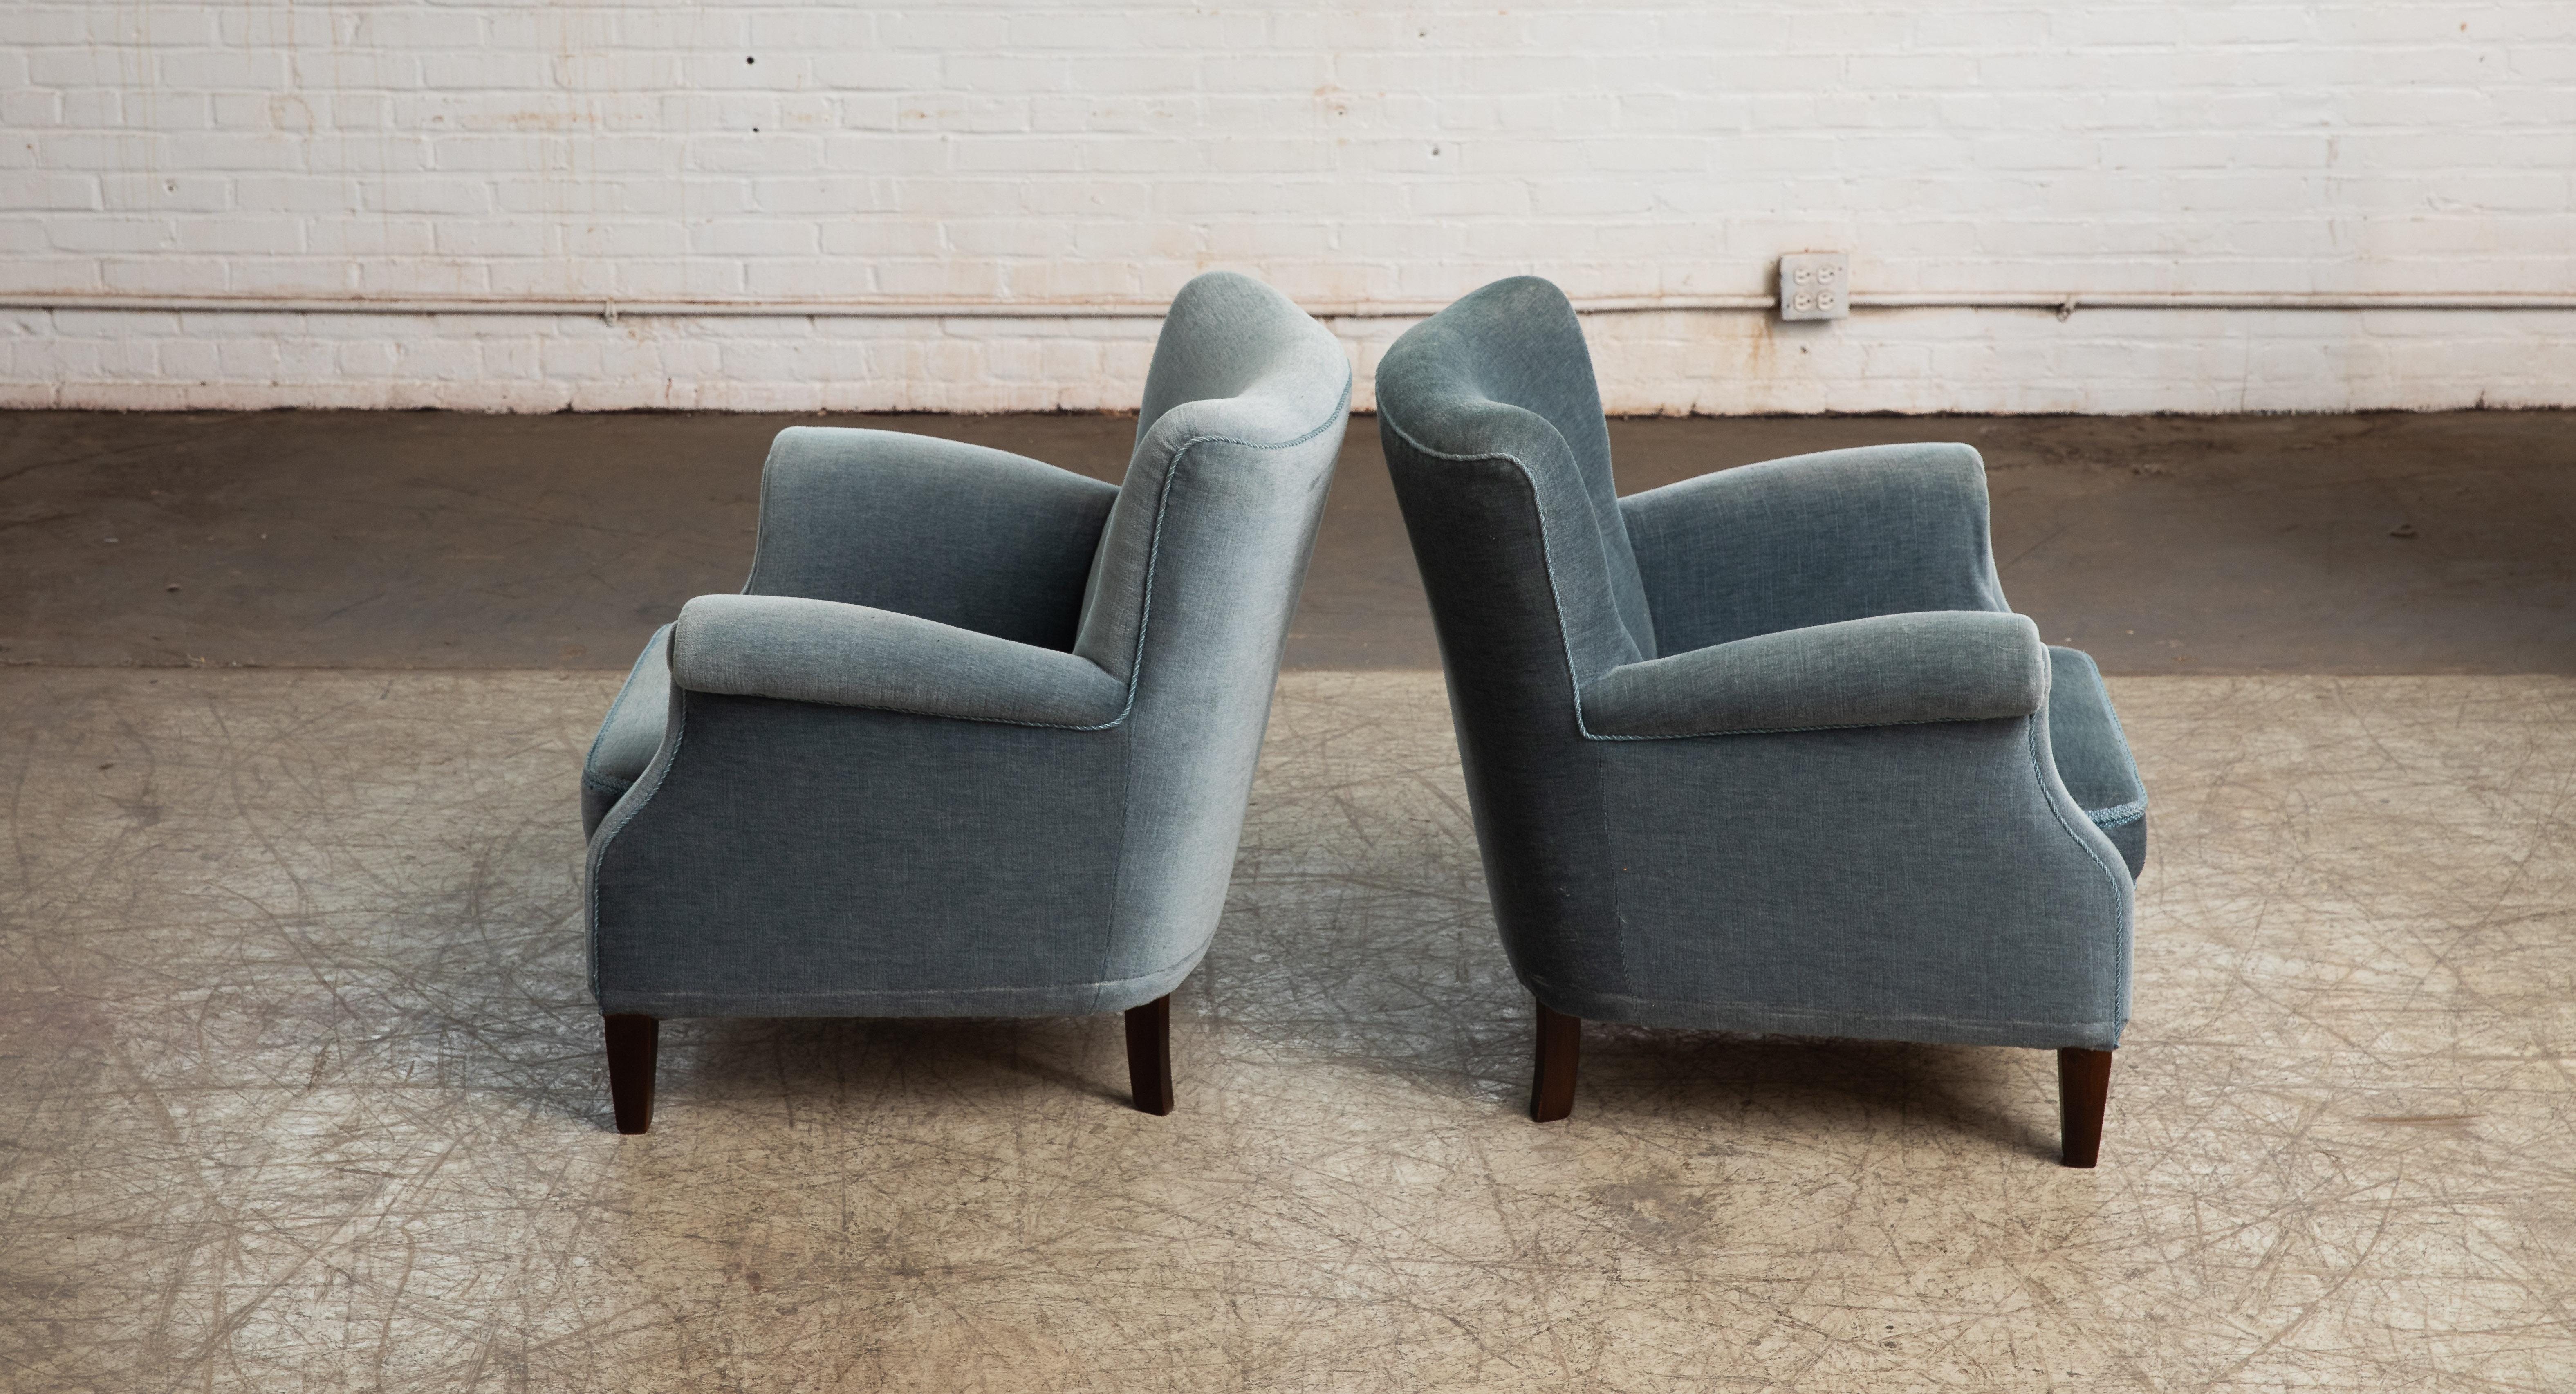 Mid-20th Century Pair of Danish 1950s Lounge Chairs in GreyBlue Mohair Attributed to Fritz Hansen